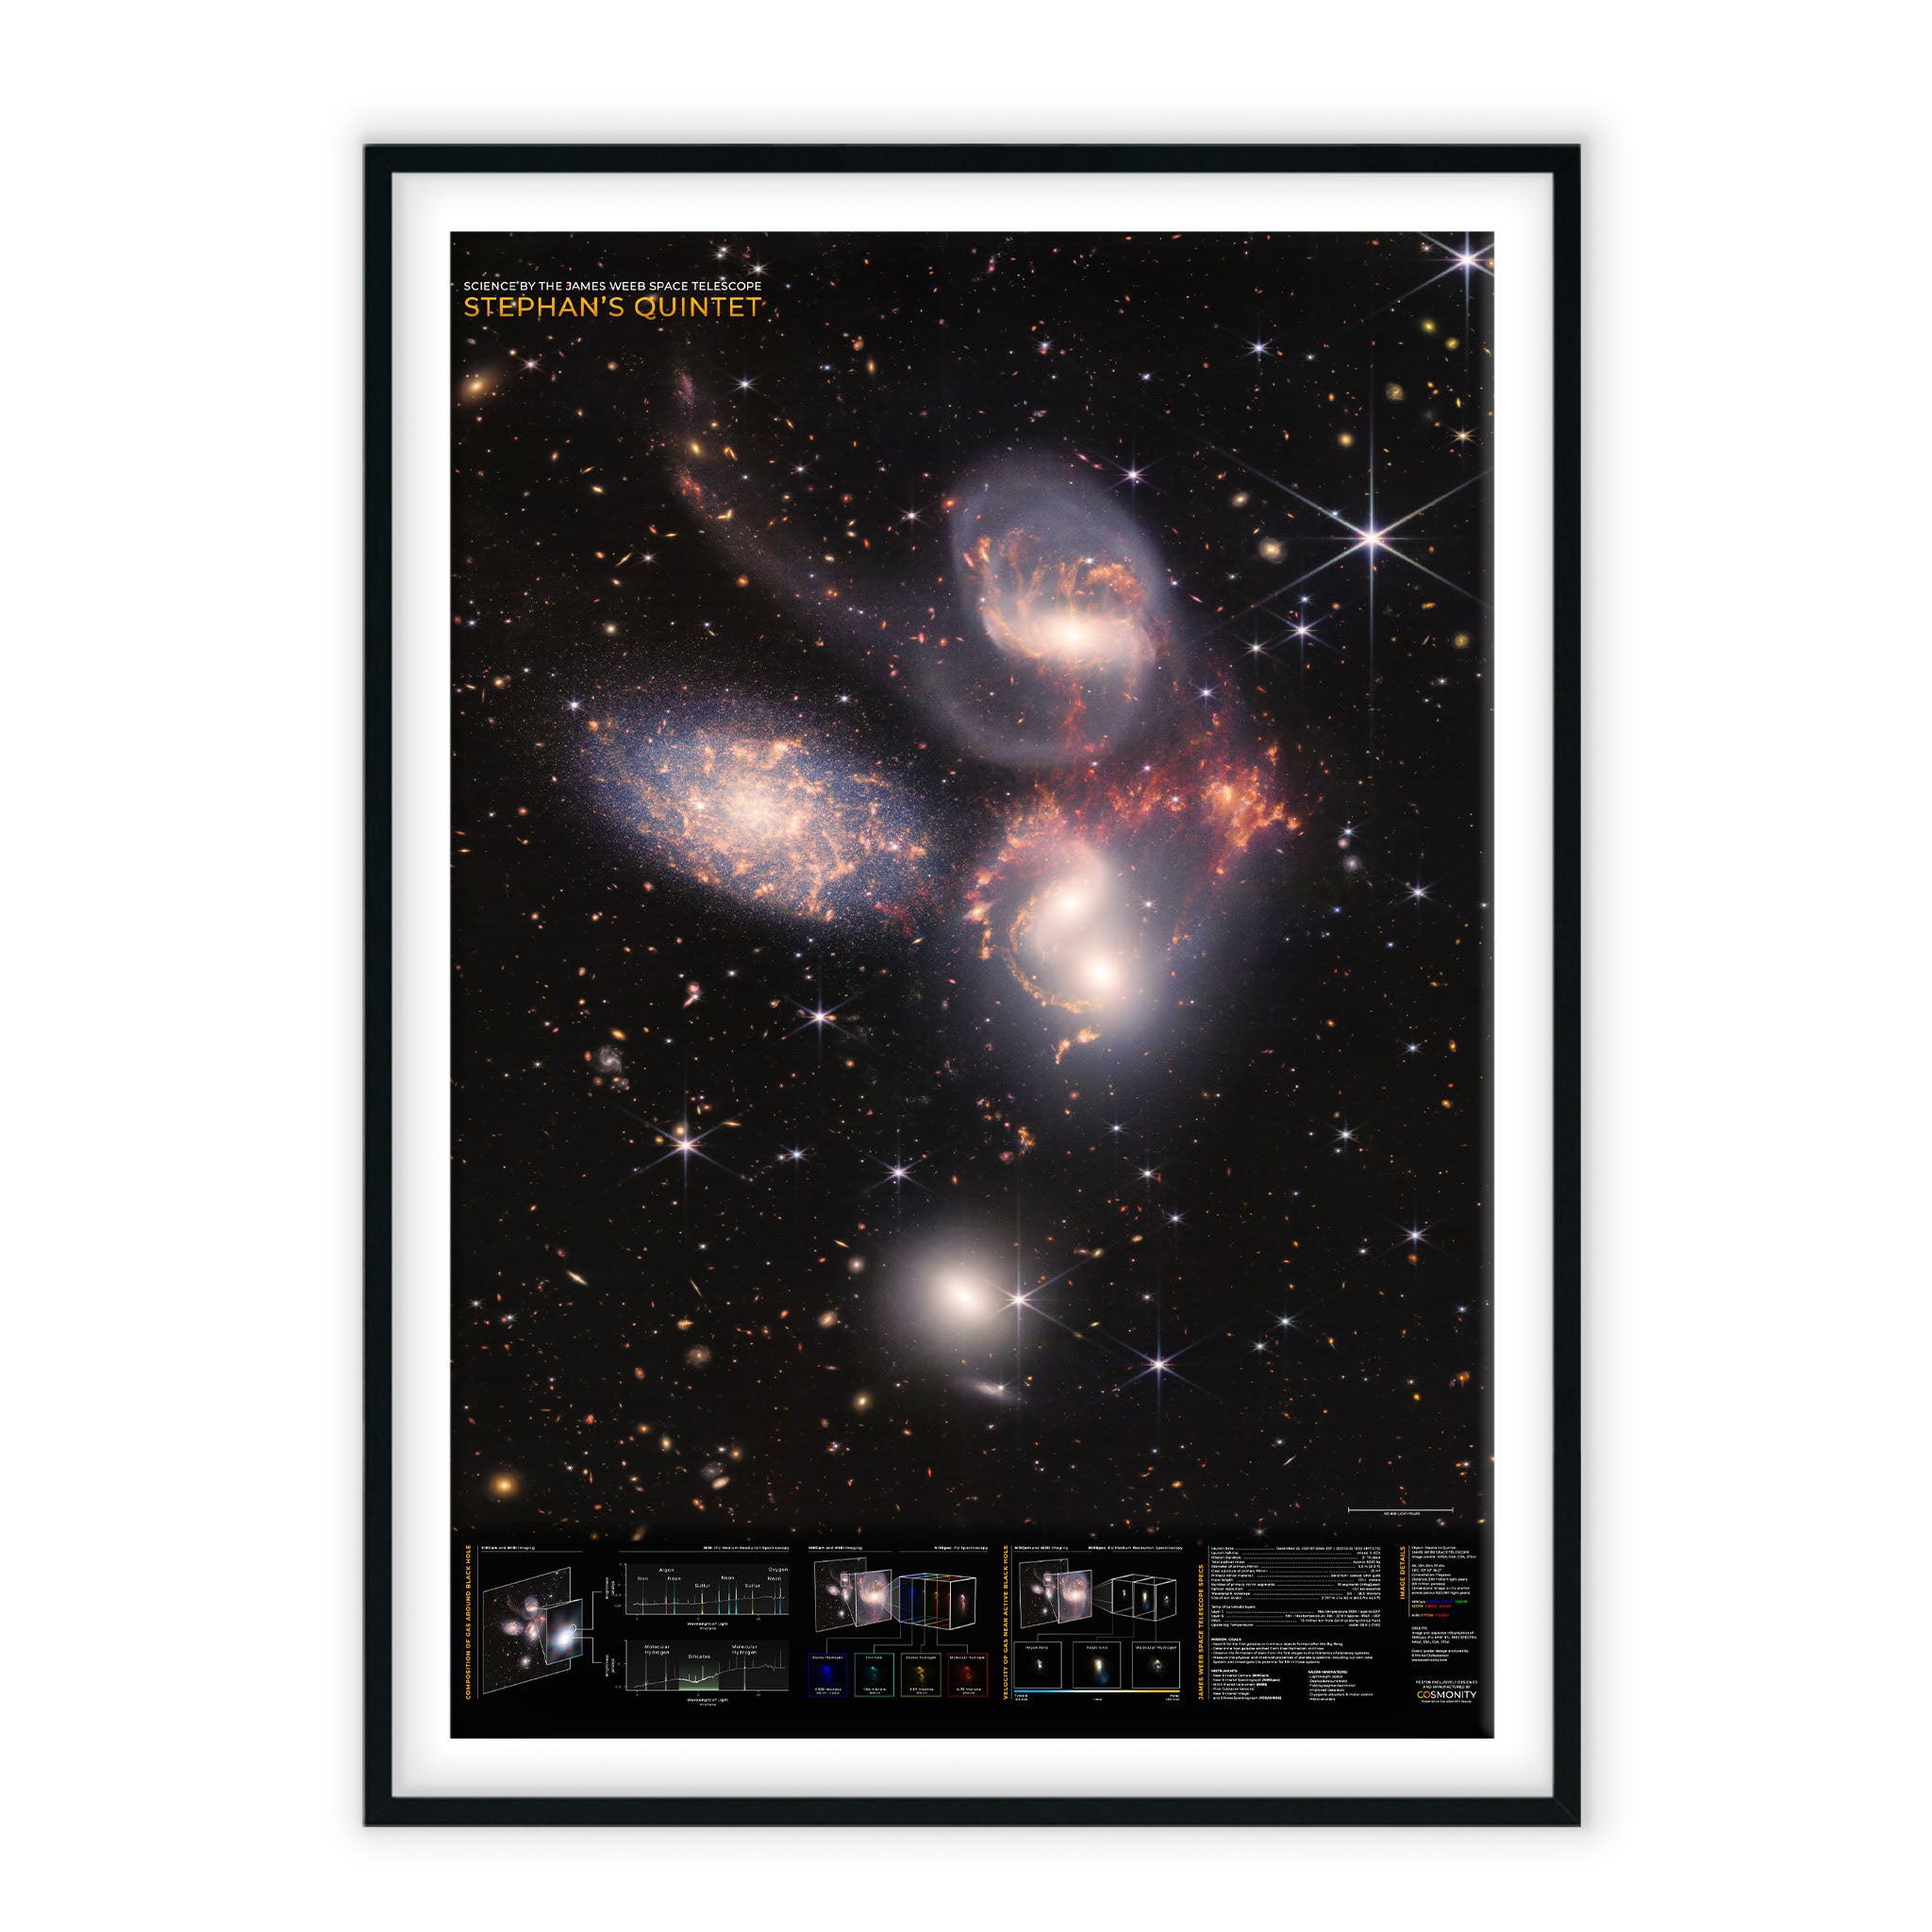 Stephan's Quintet - Science Infographic